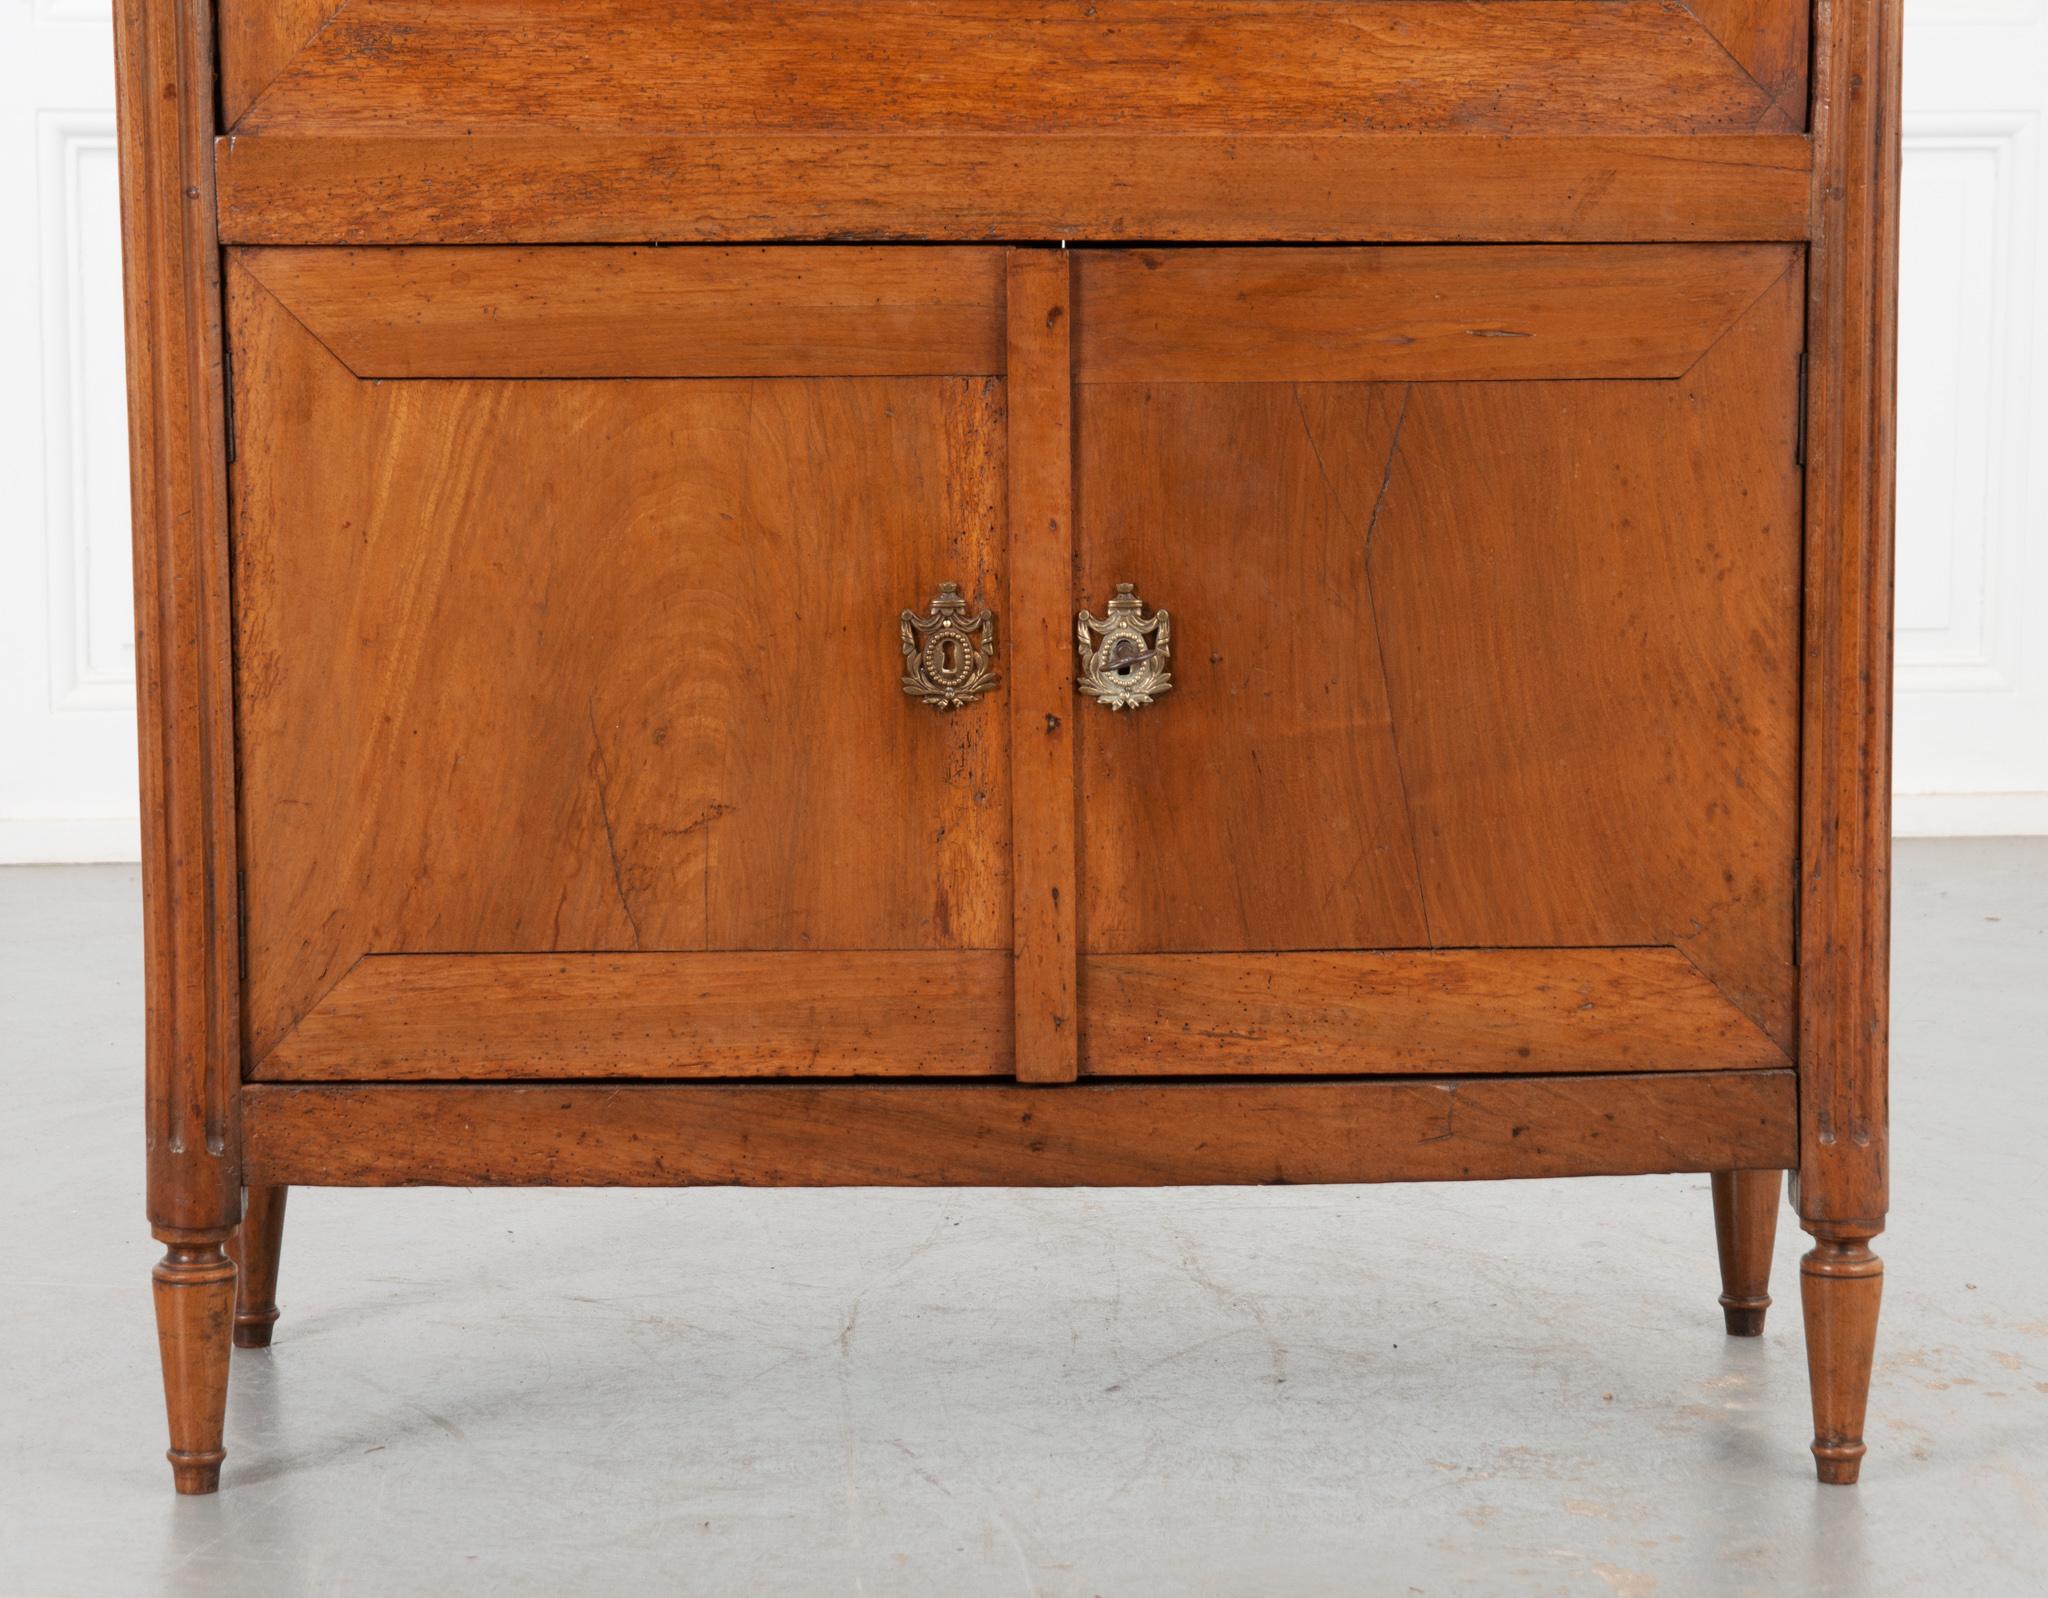 This wonderful solid walnut secre´taire a` abattant was constructed in the period of Louis XVI, circa 1780. A single, slim drawer at the top features brass drop ring pulls and a decorative escutcheon that matches throughout the piece. The front of